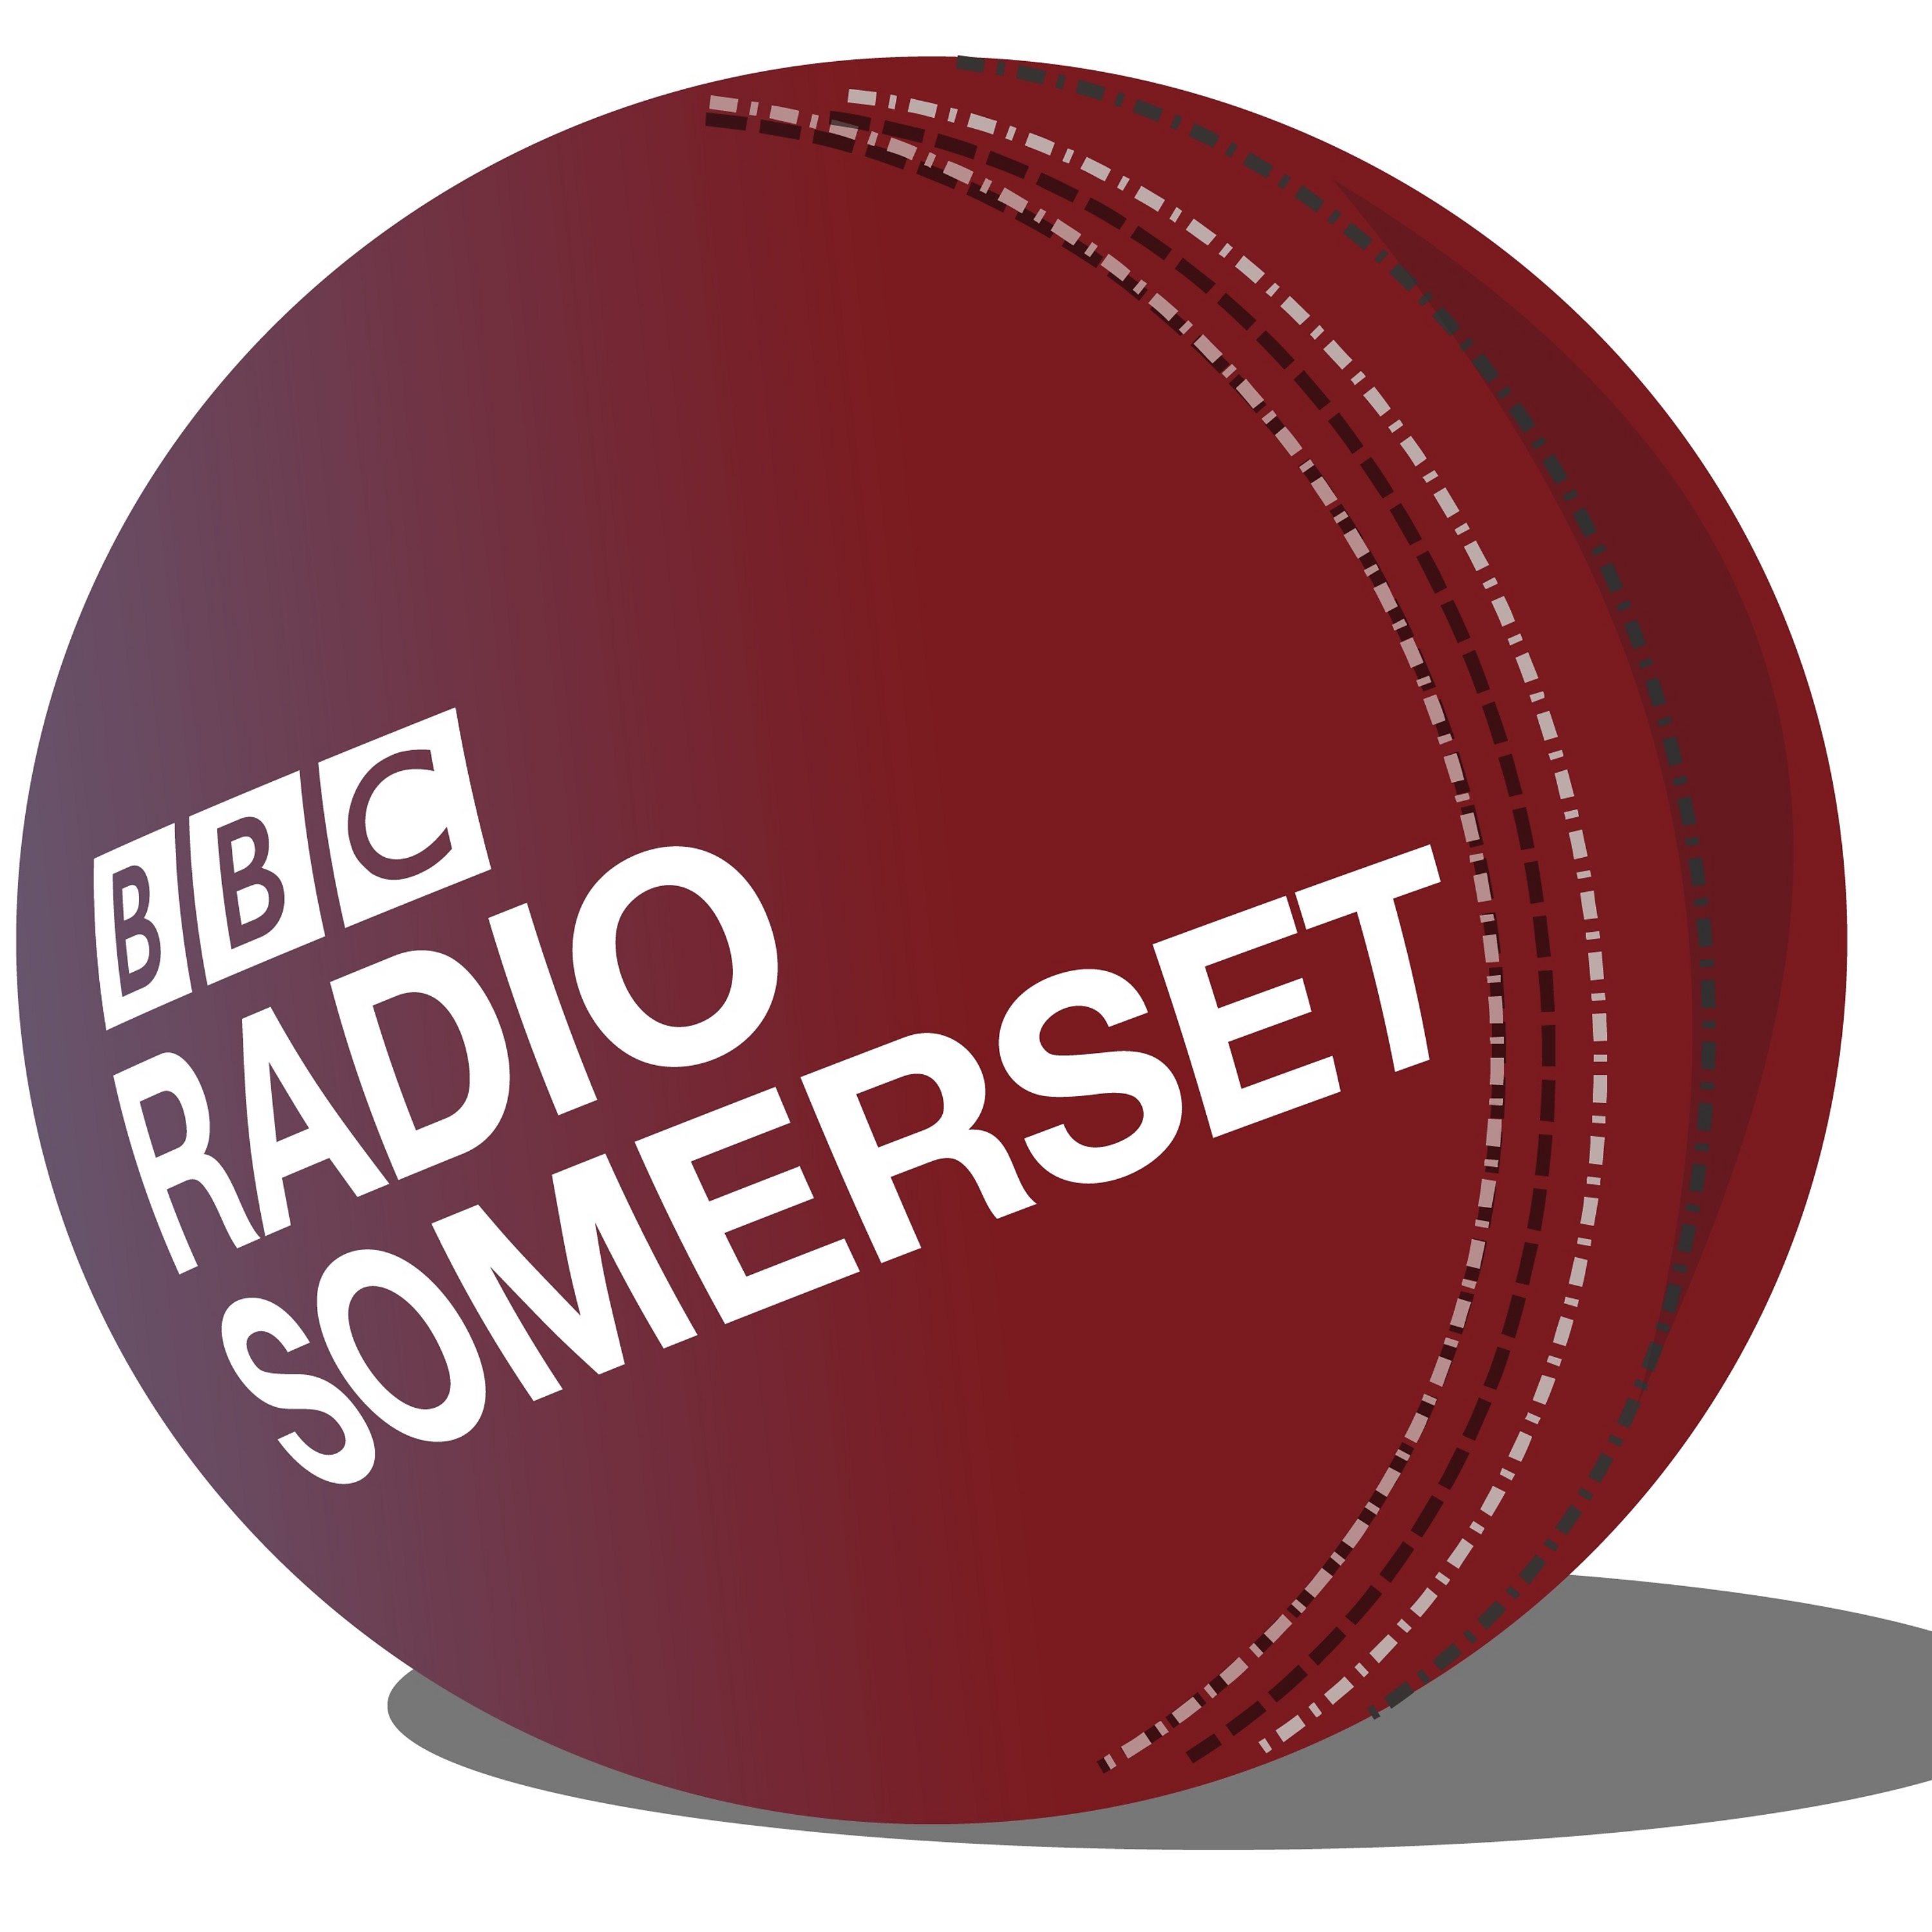 Somerset prepare for Lord’s